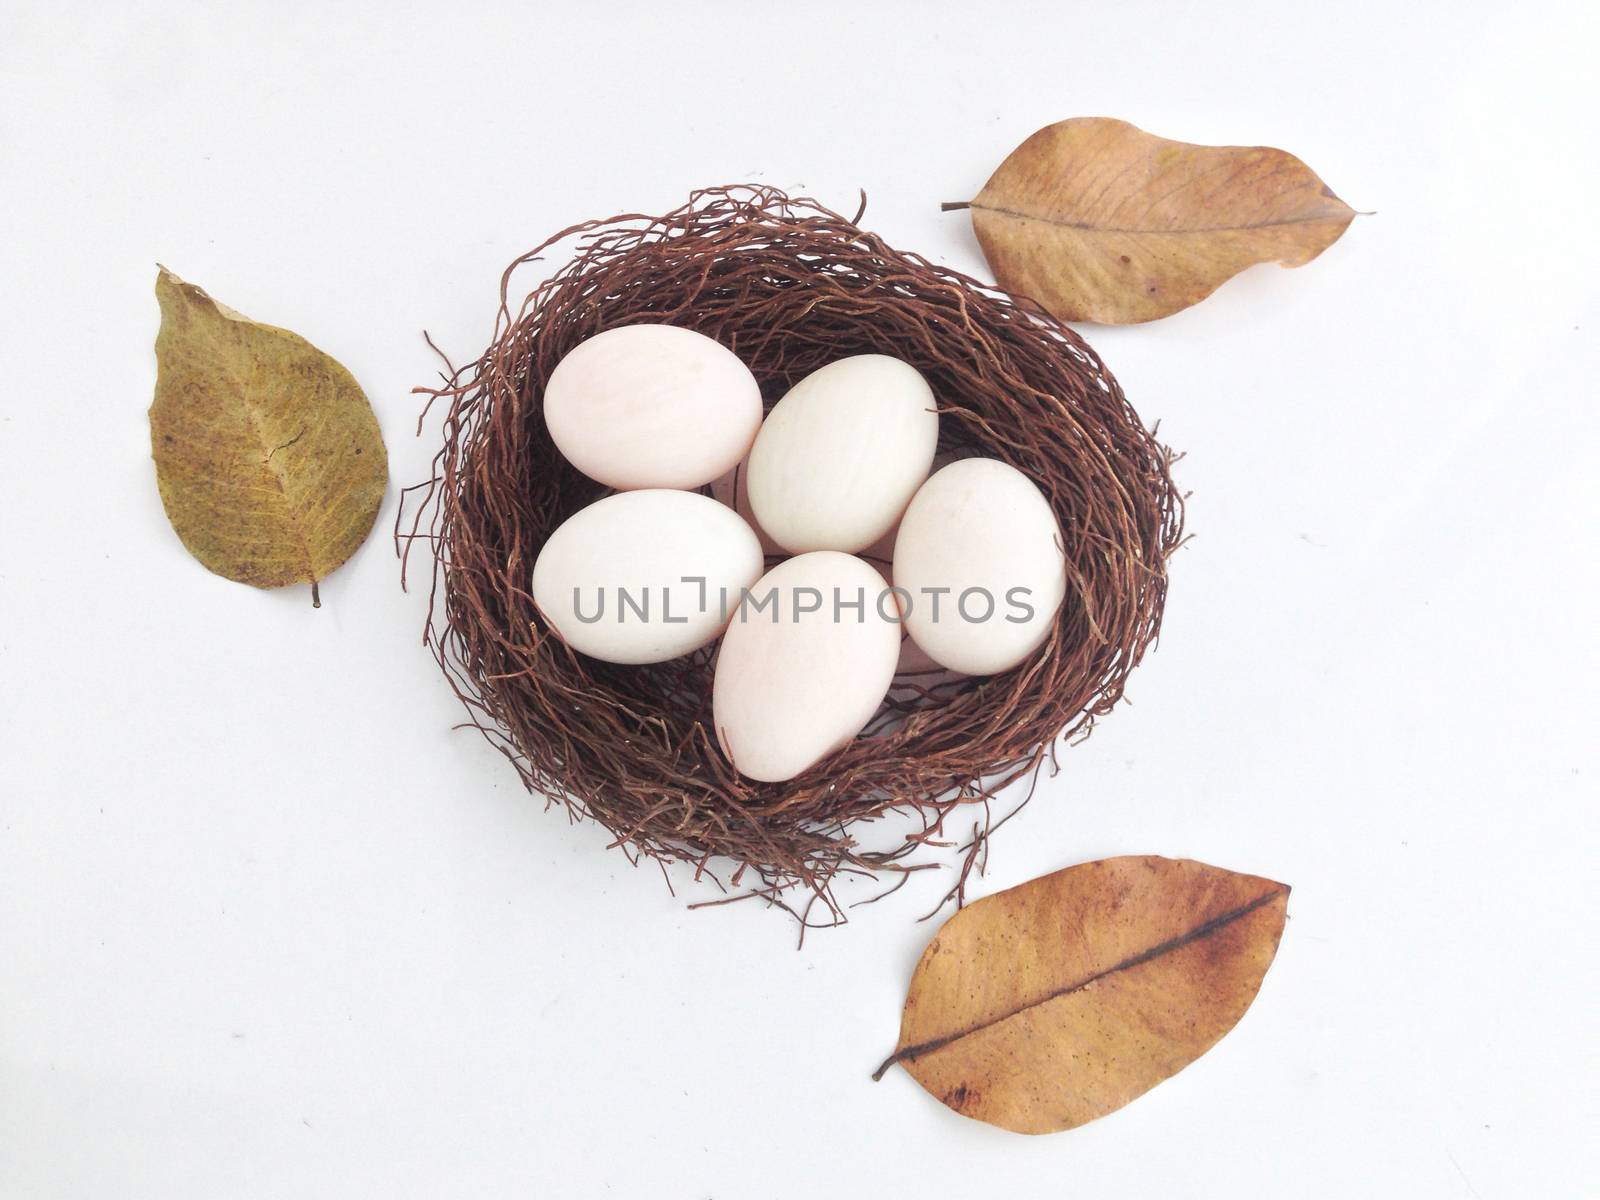 duck egg on nest made from banyan tree air root with white backg by Bowonpat